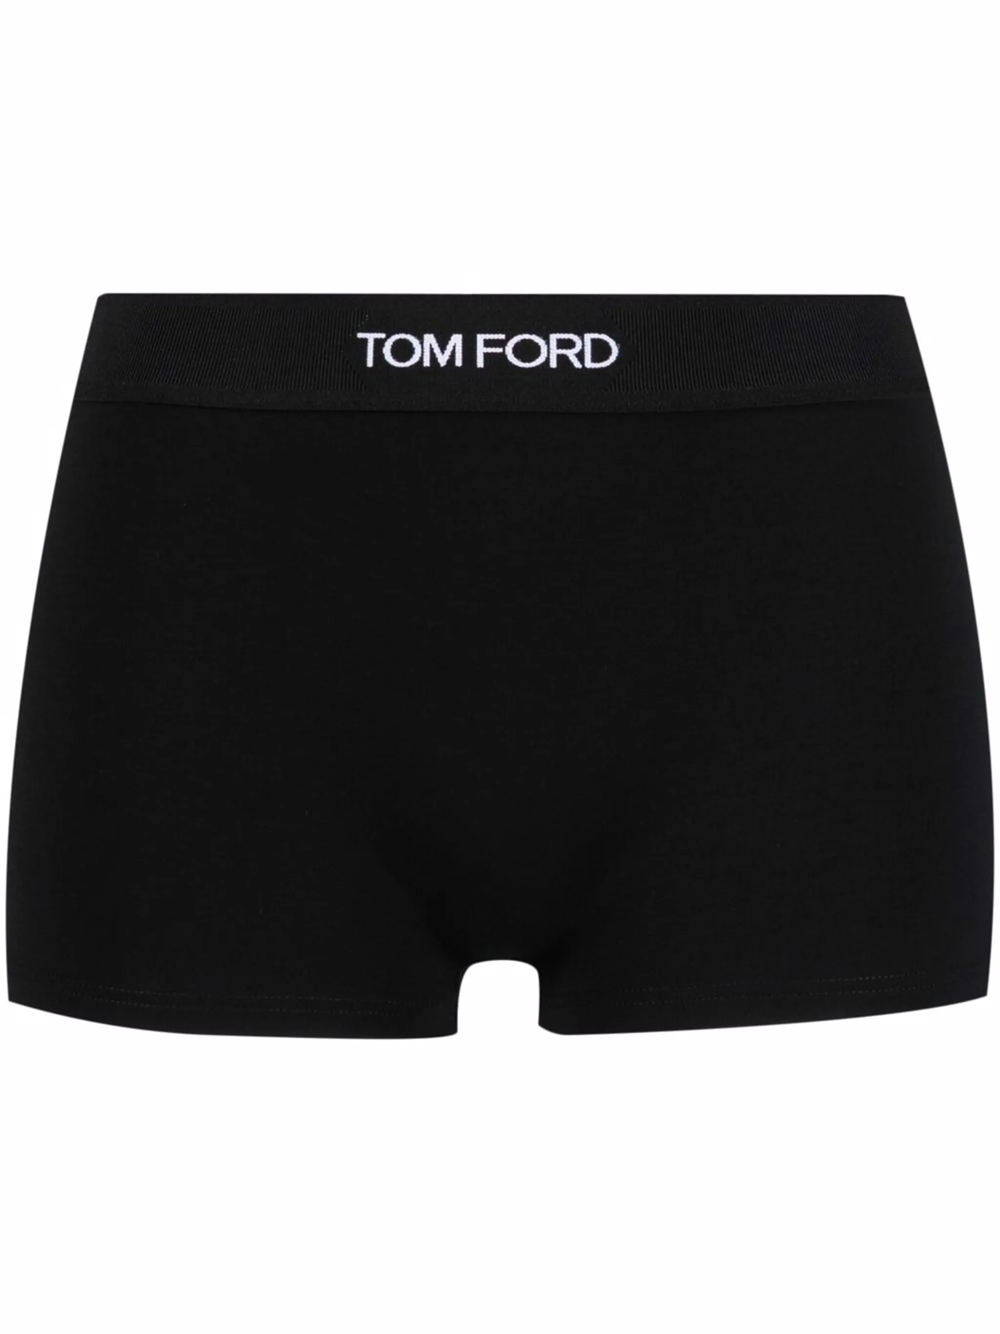 Tom Ford Boxers With Print In Black